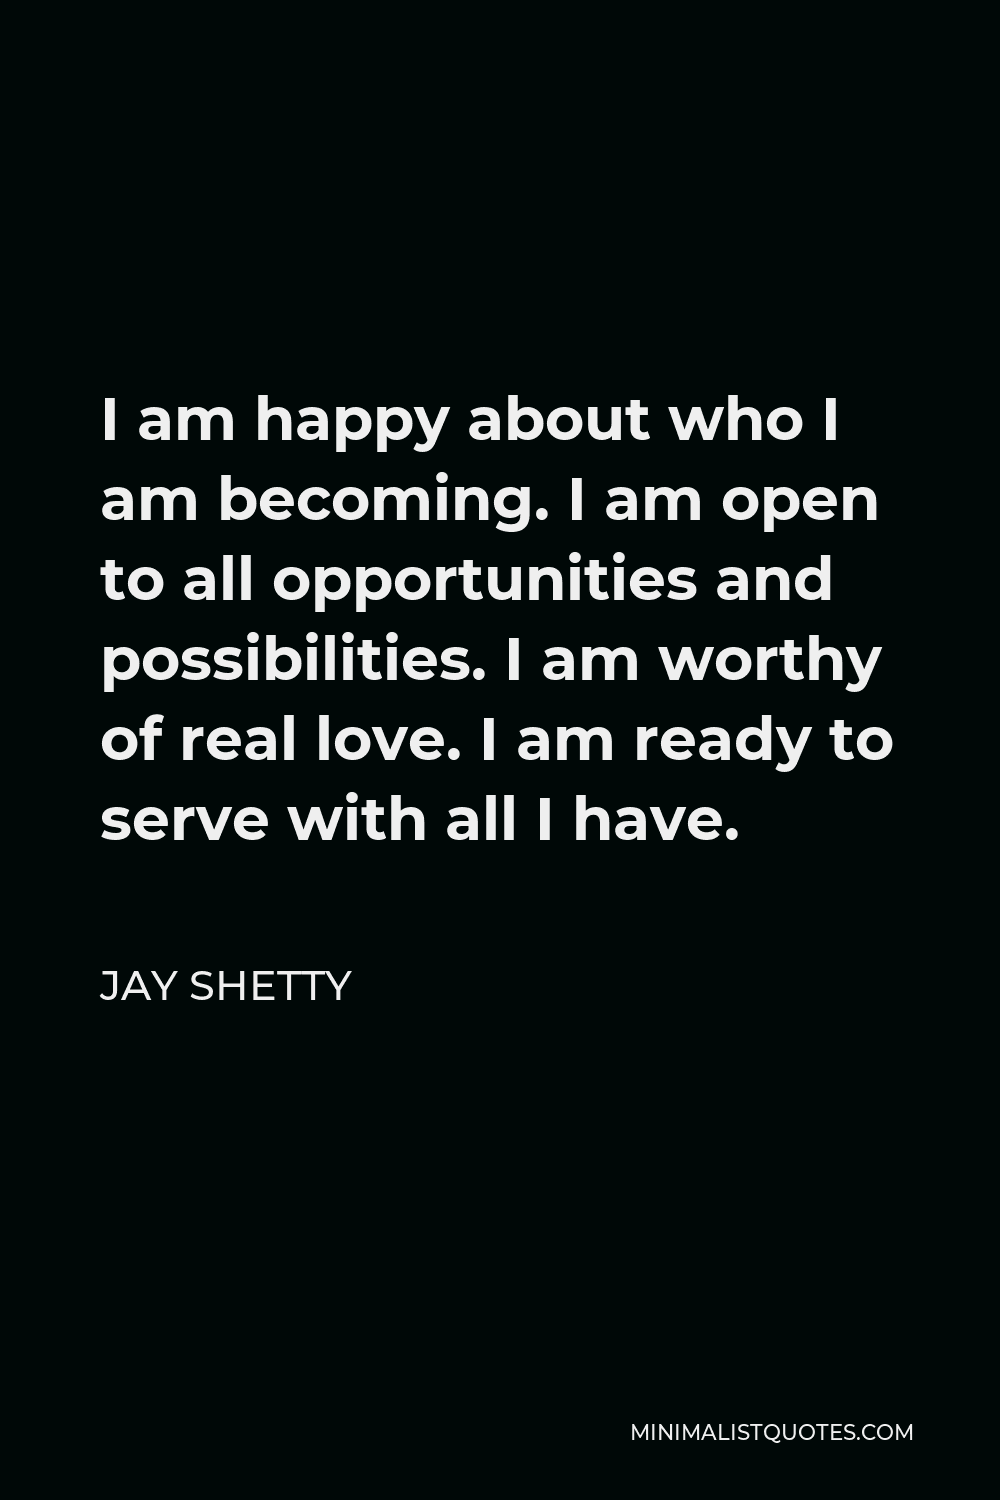 Jay Shetty Quote - I am happy about who I am becoming. I am open to all opportunities and possibilities. I am worthy of real love. I am ready to serve with all I have.